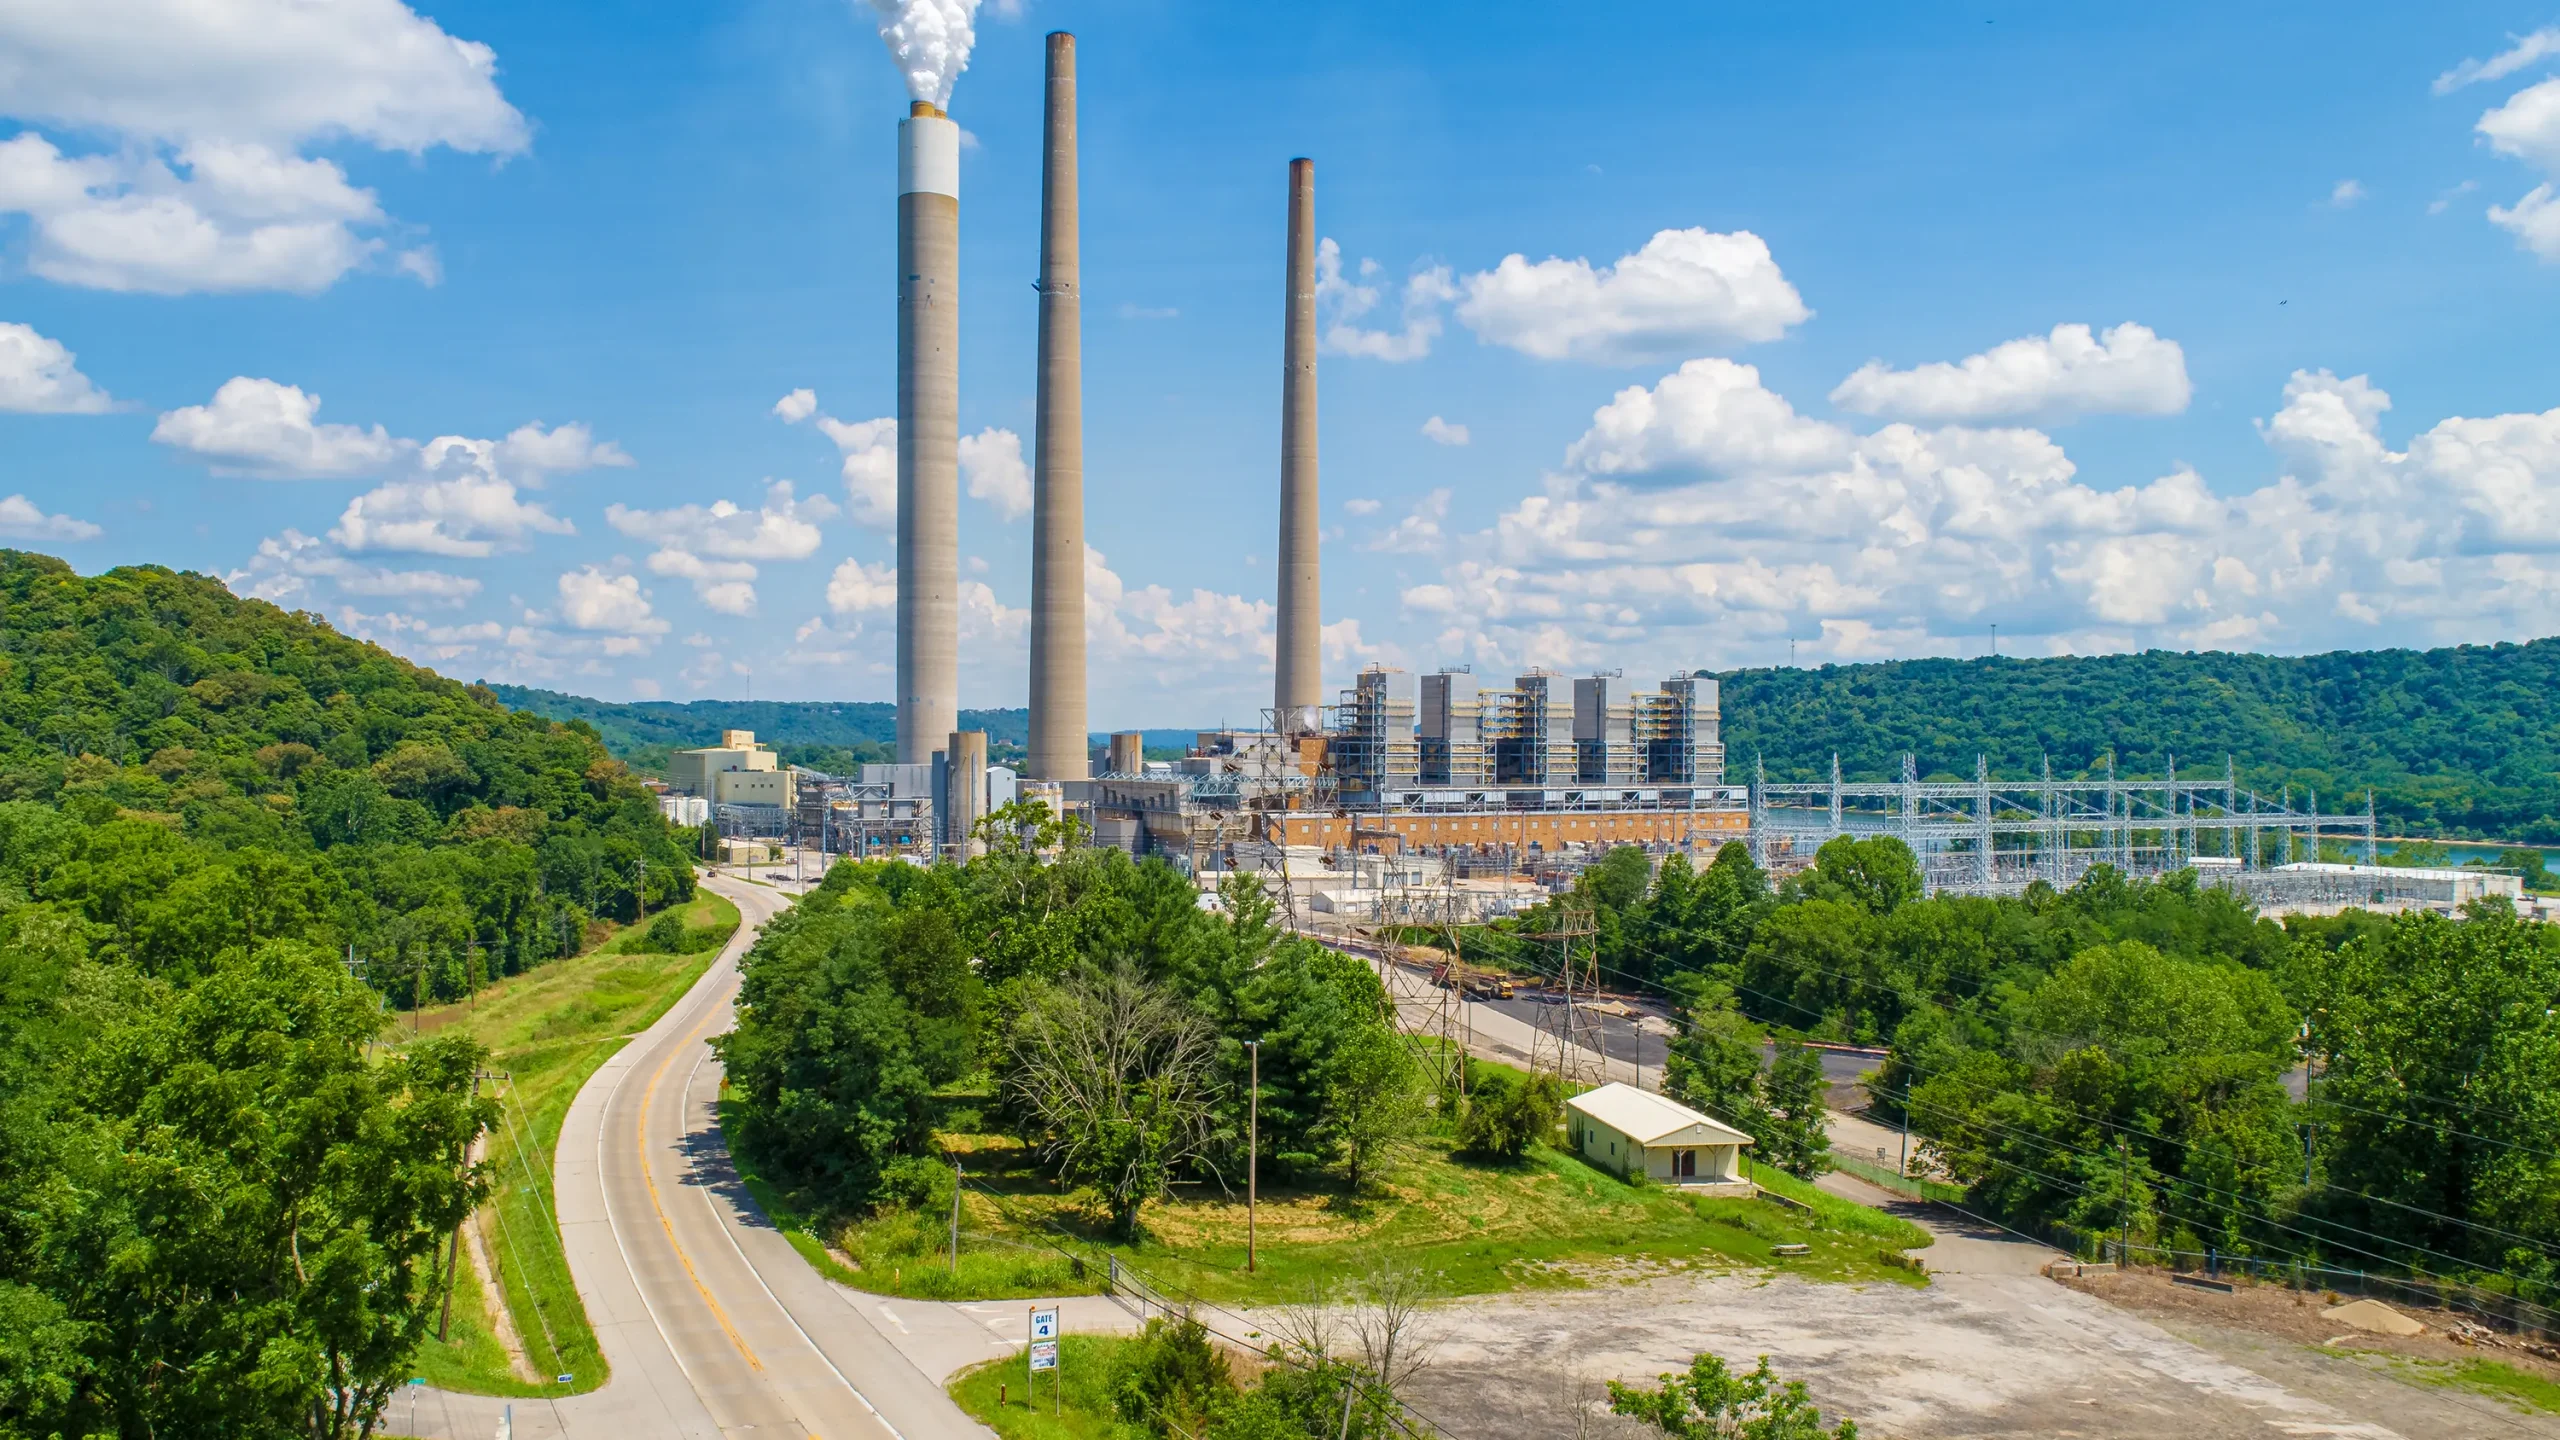 Bird's-eye view of a coal-fired power plant by the Ohio River, generating electricity through traditional means.